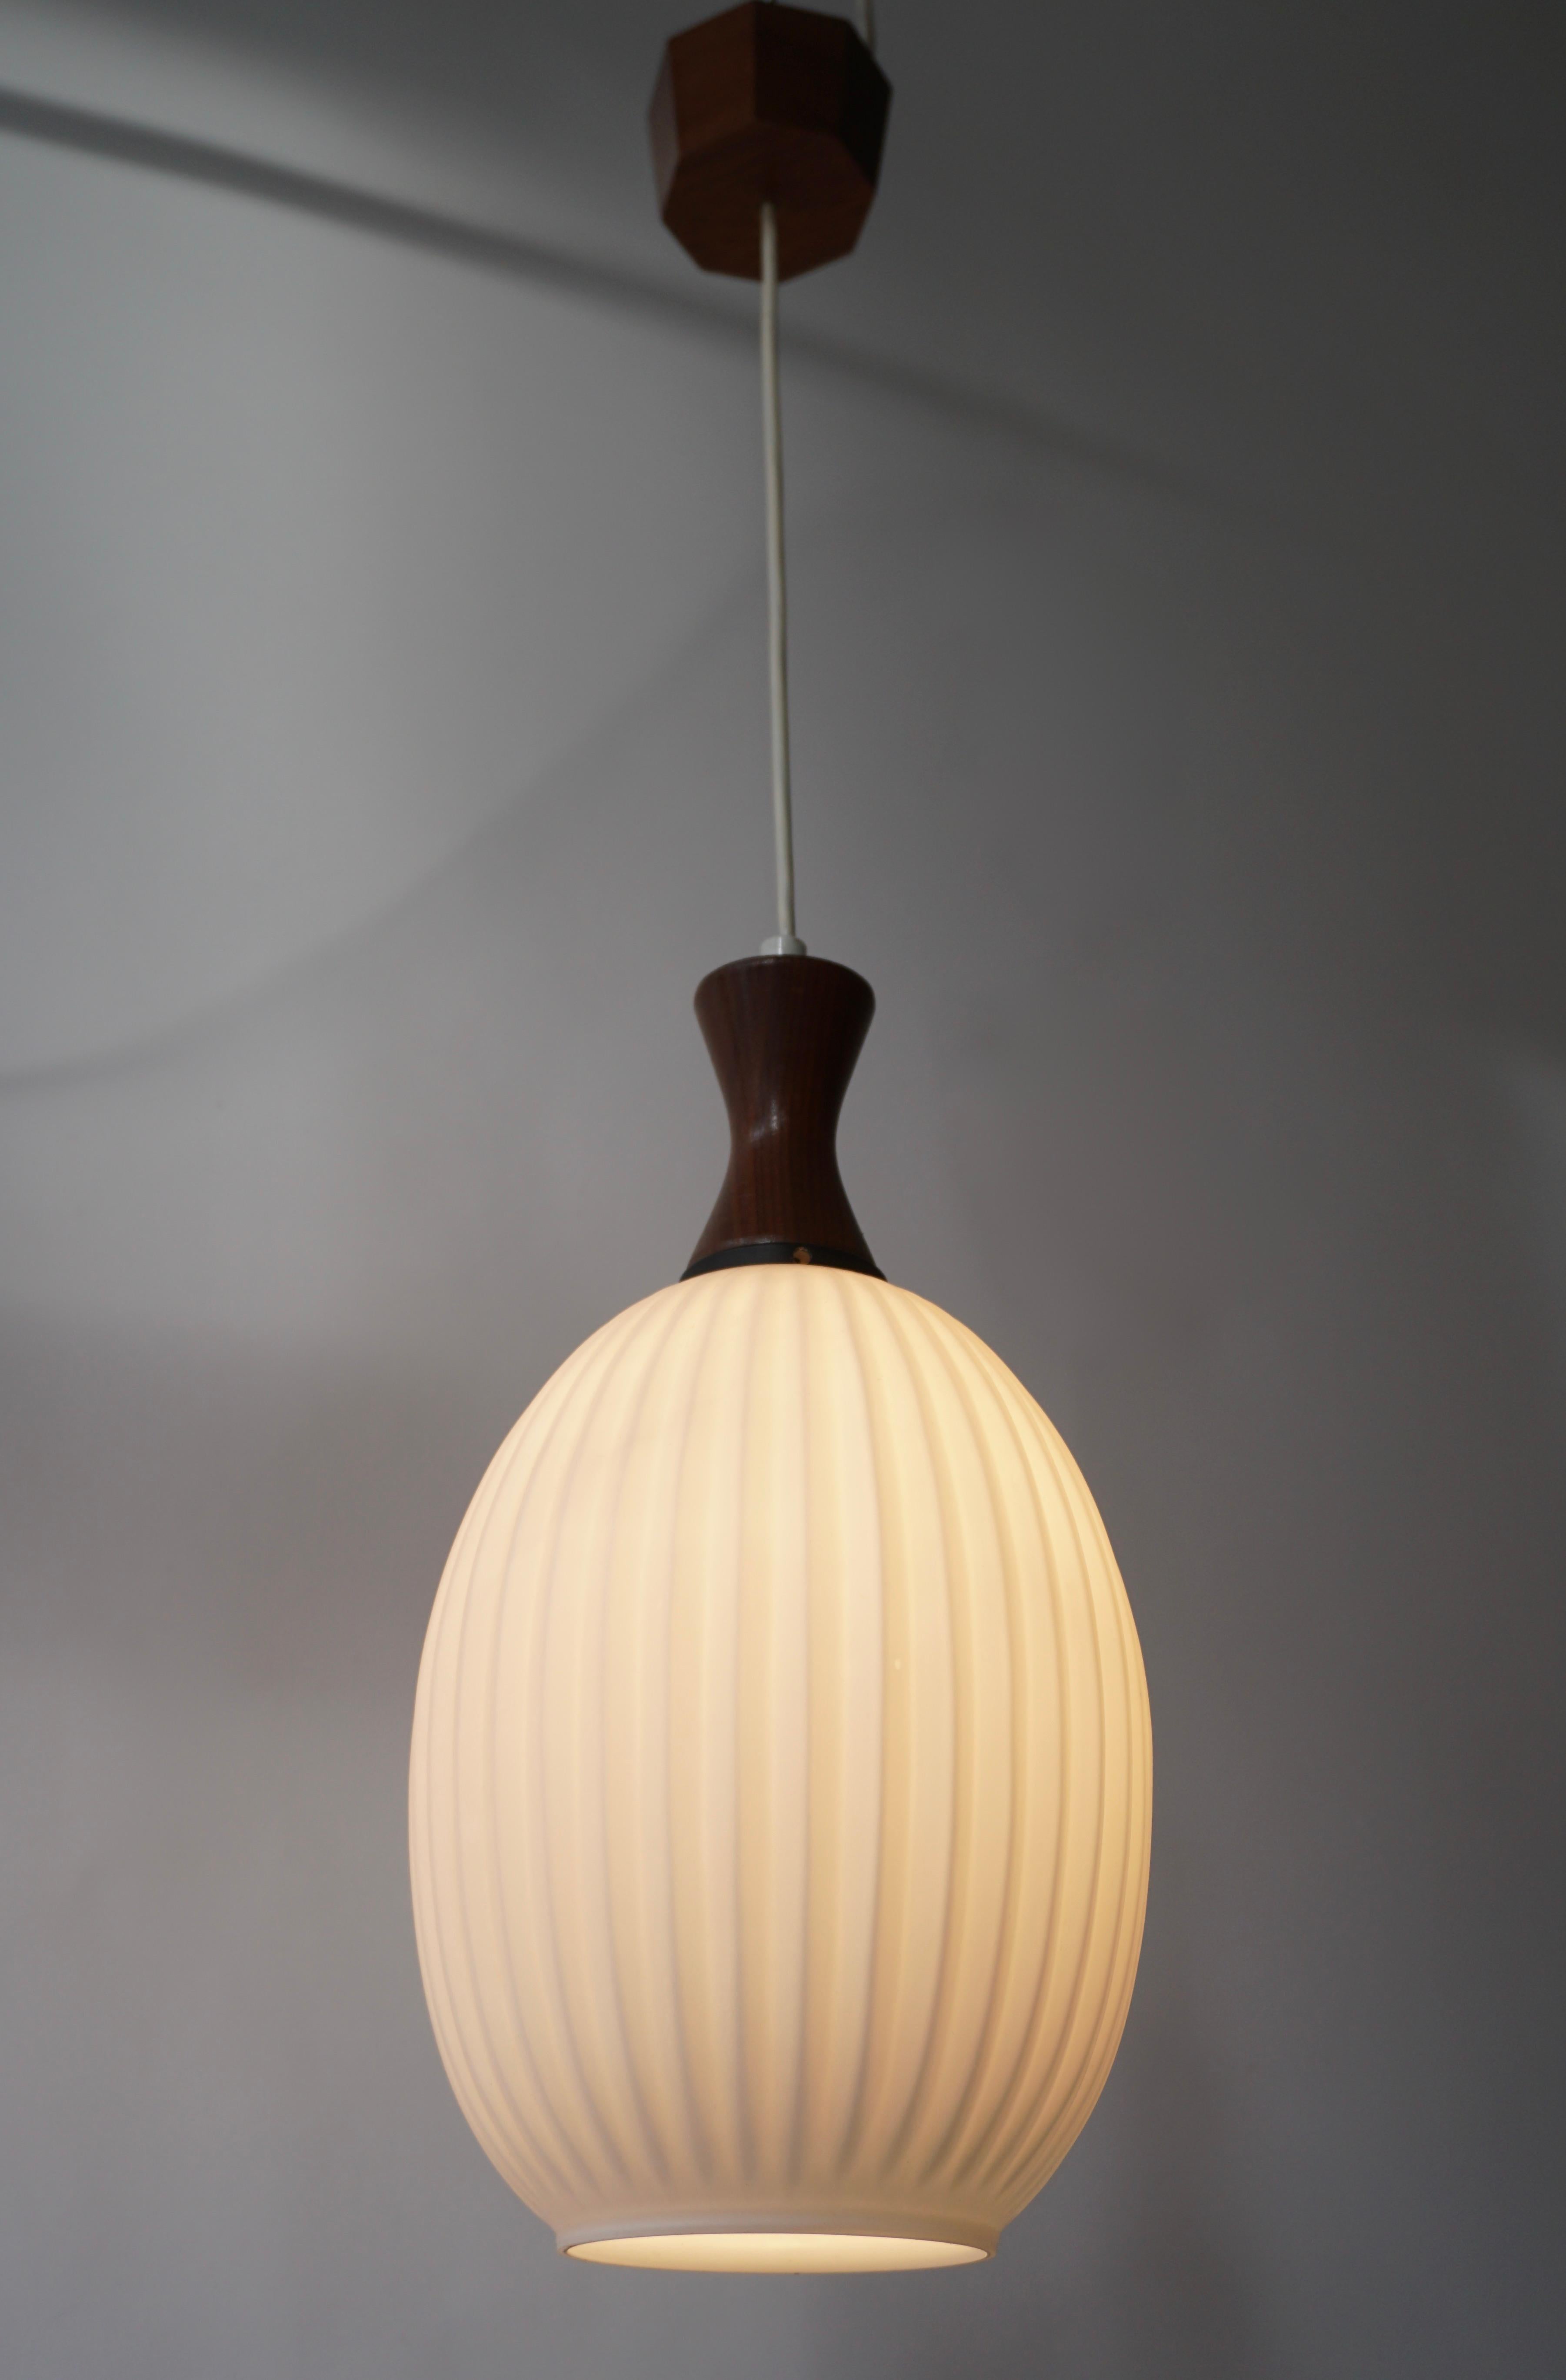 Midcentury Danish glass and wood ceiling light.

The height of the glass is 10.2